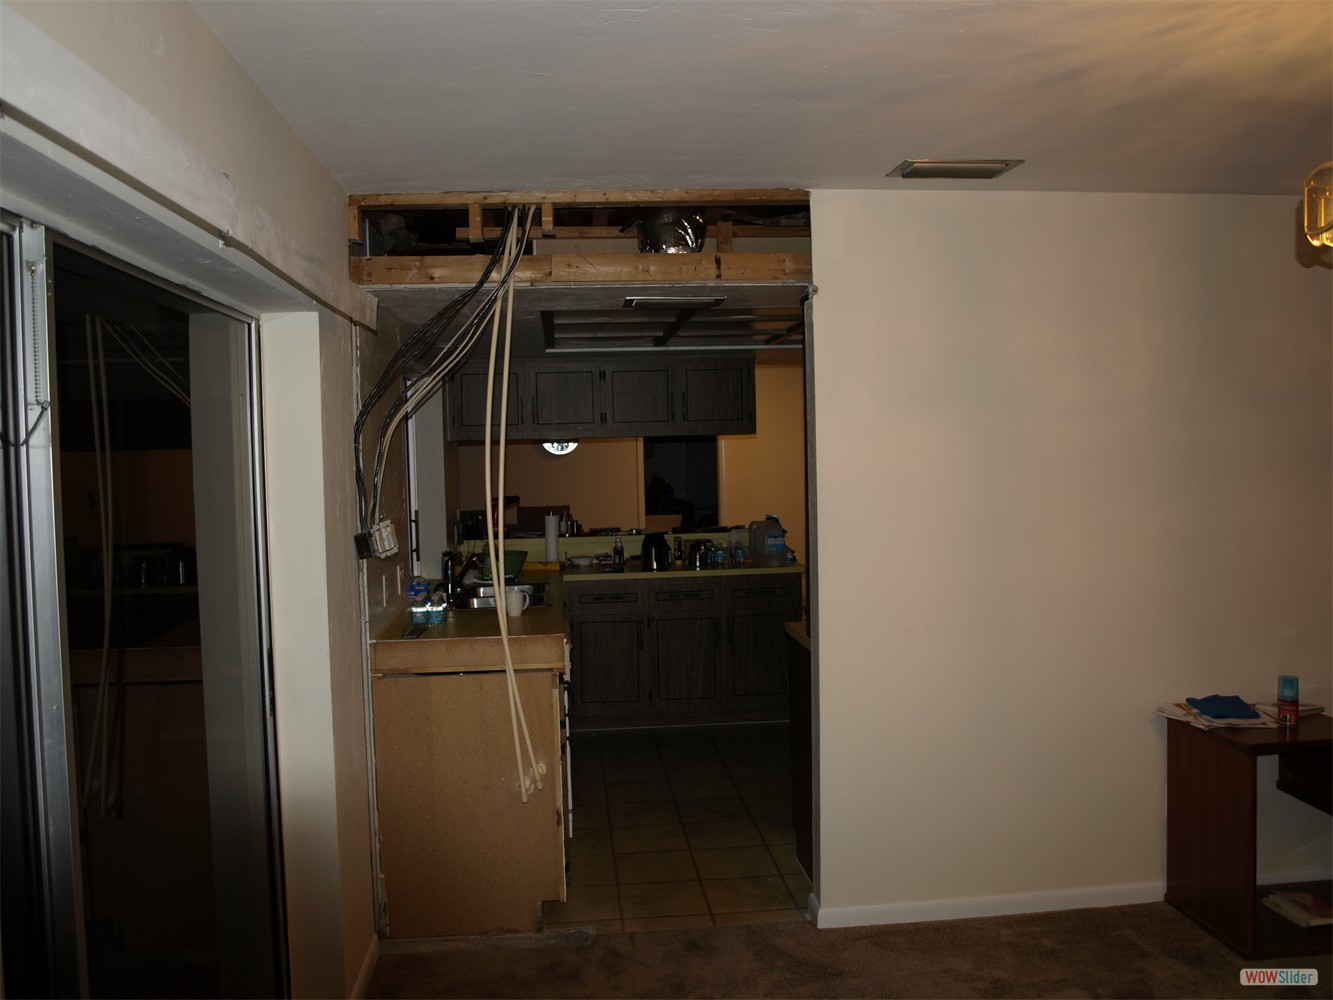 This opening to the area to become the dining room has been enlarged already